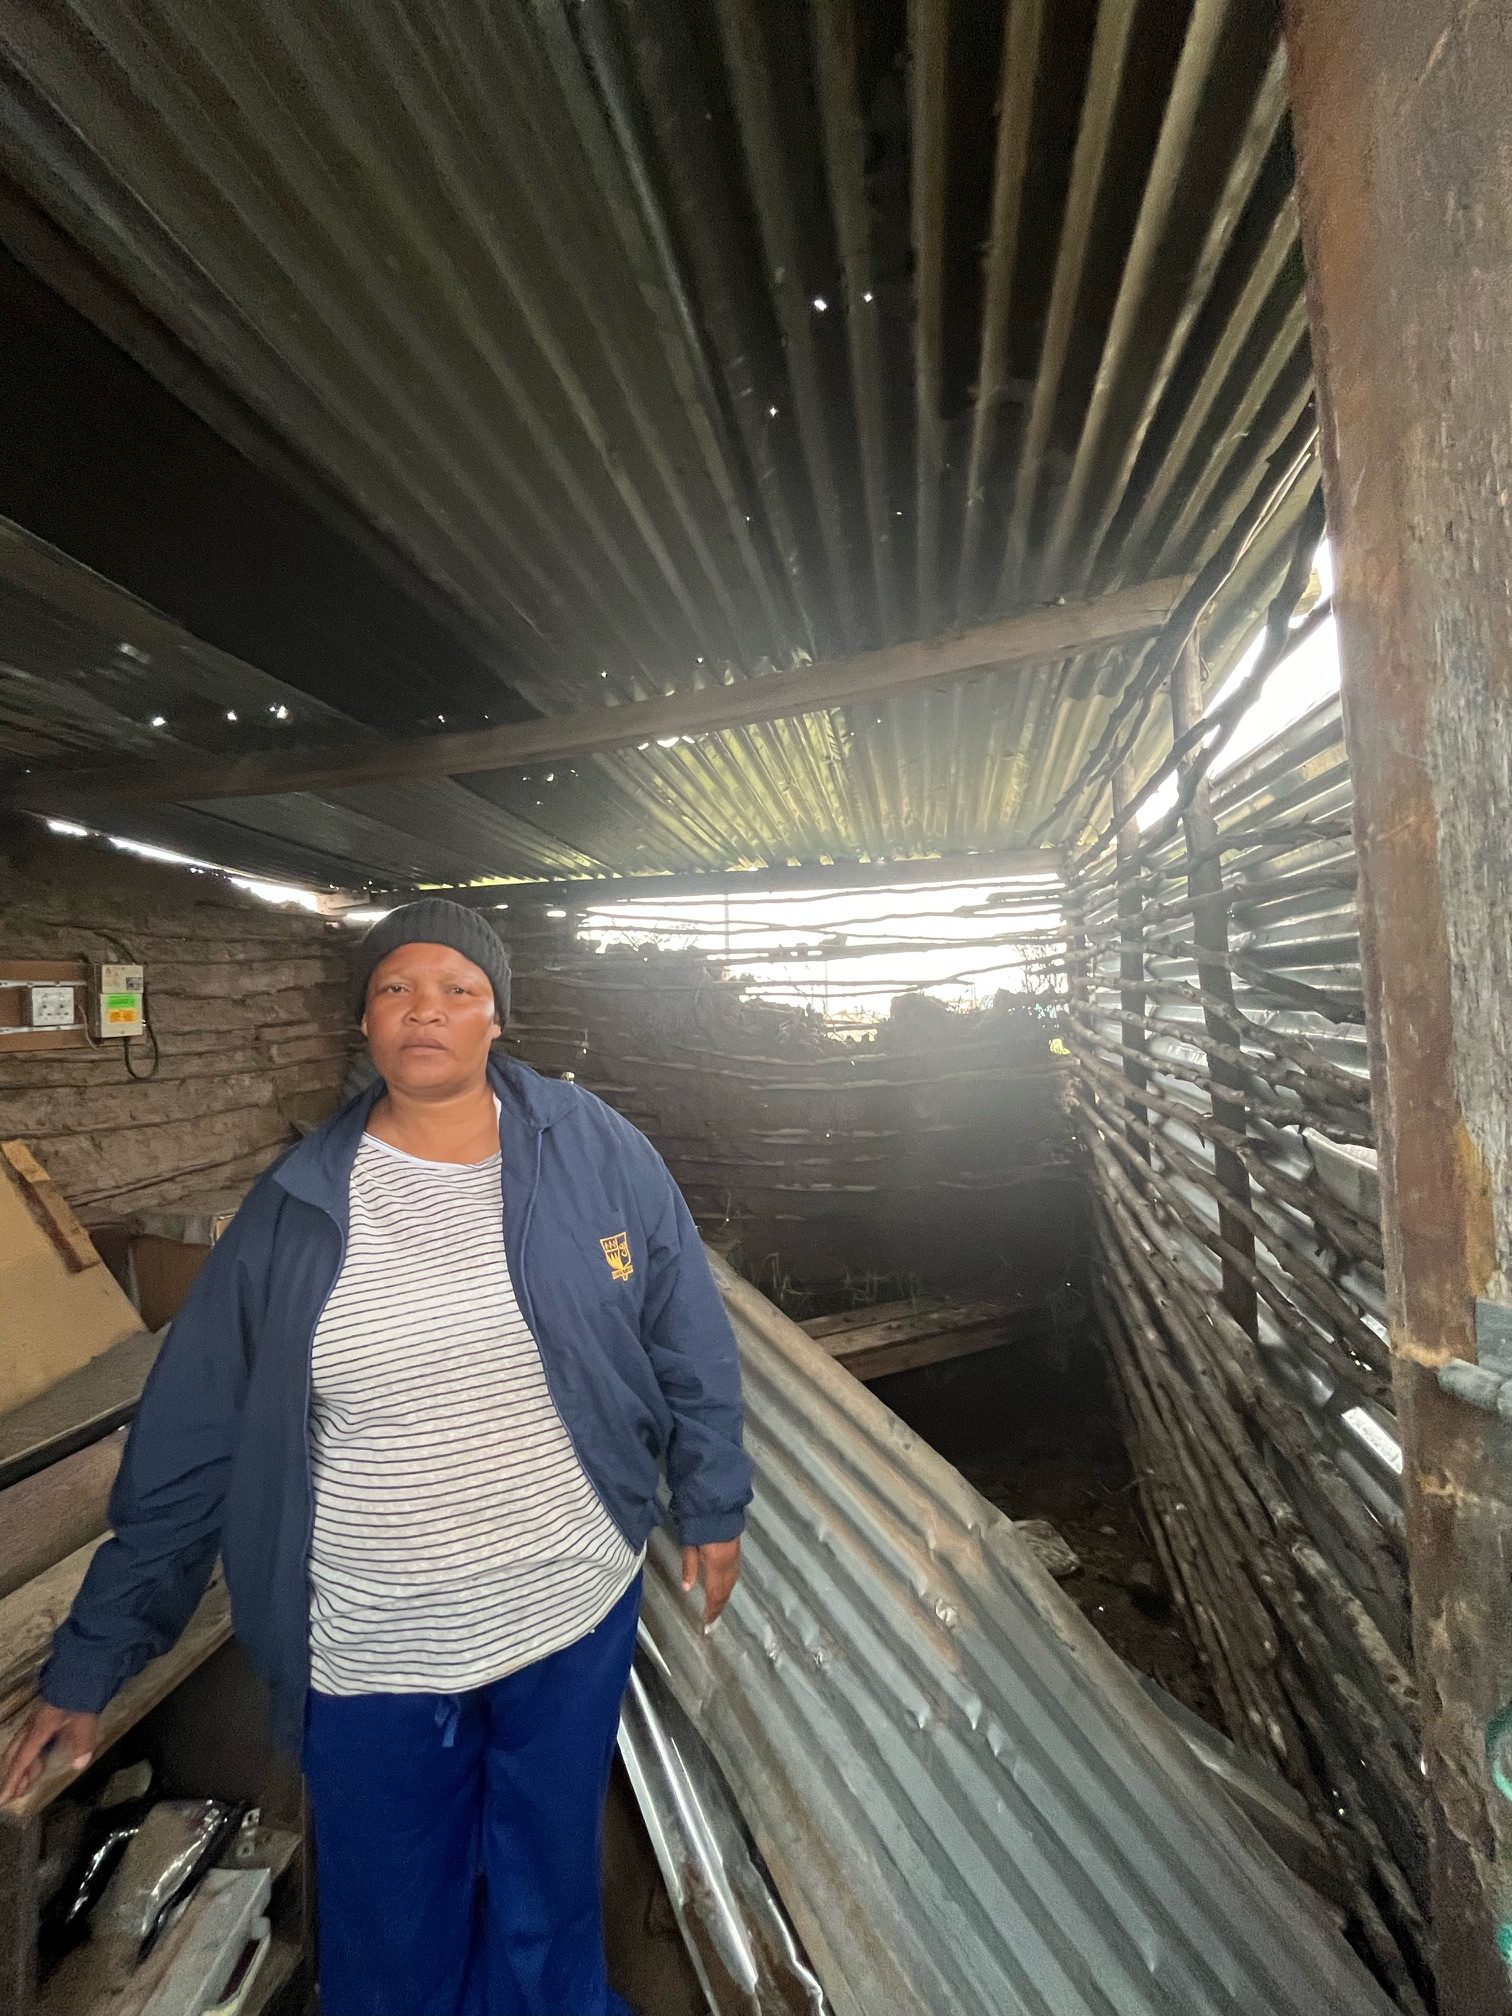 Member of a displaced family Sta ding in ruins cause by terrible winds and rain Photo by Phila-Nathi Mapisa